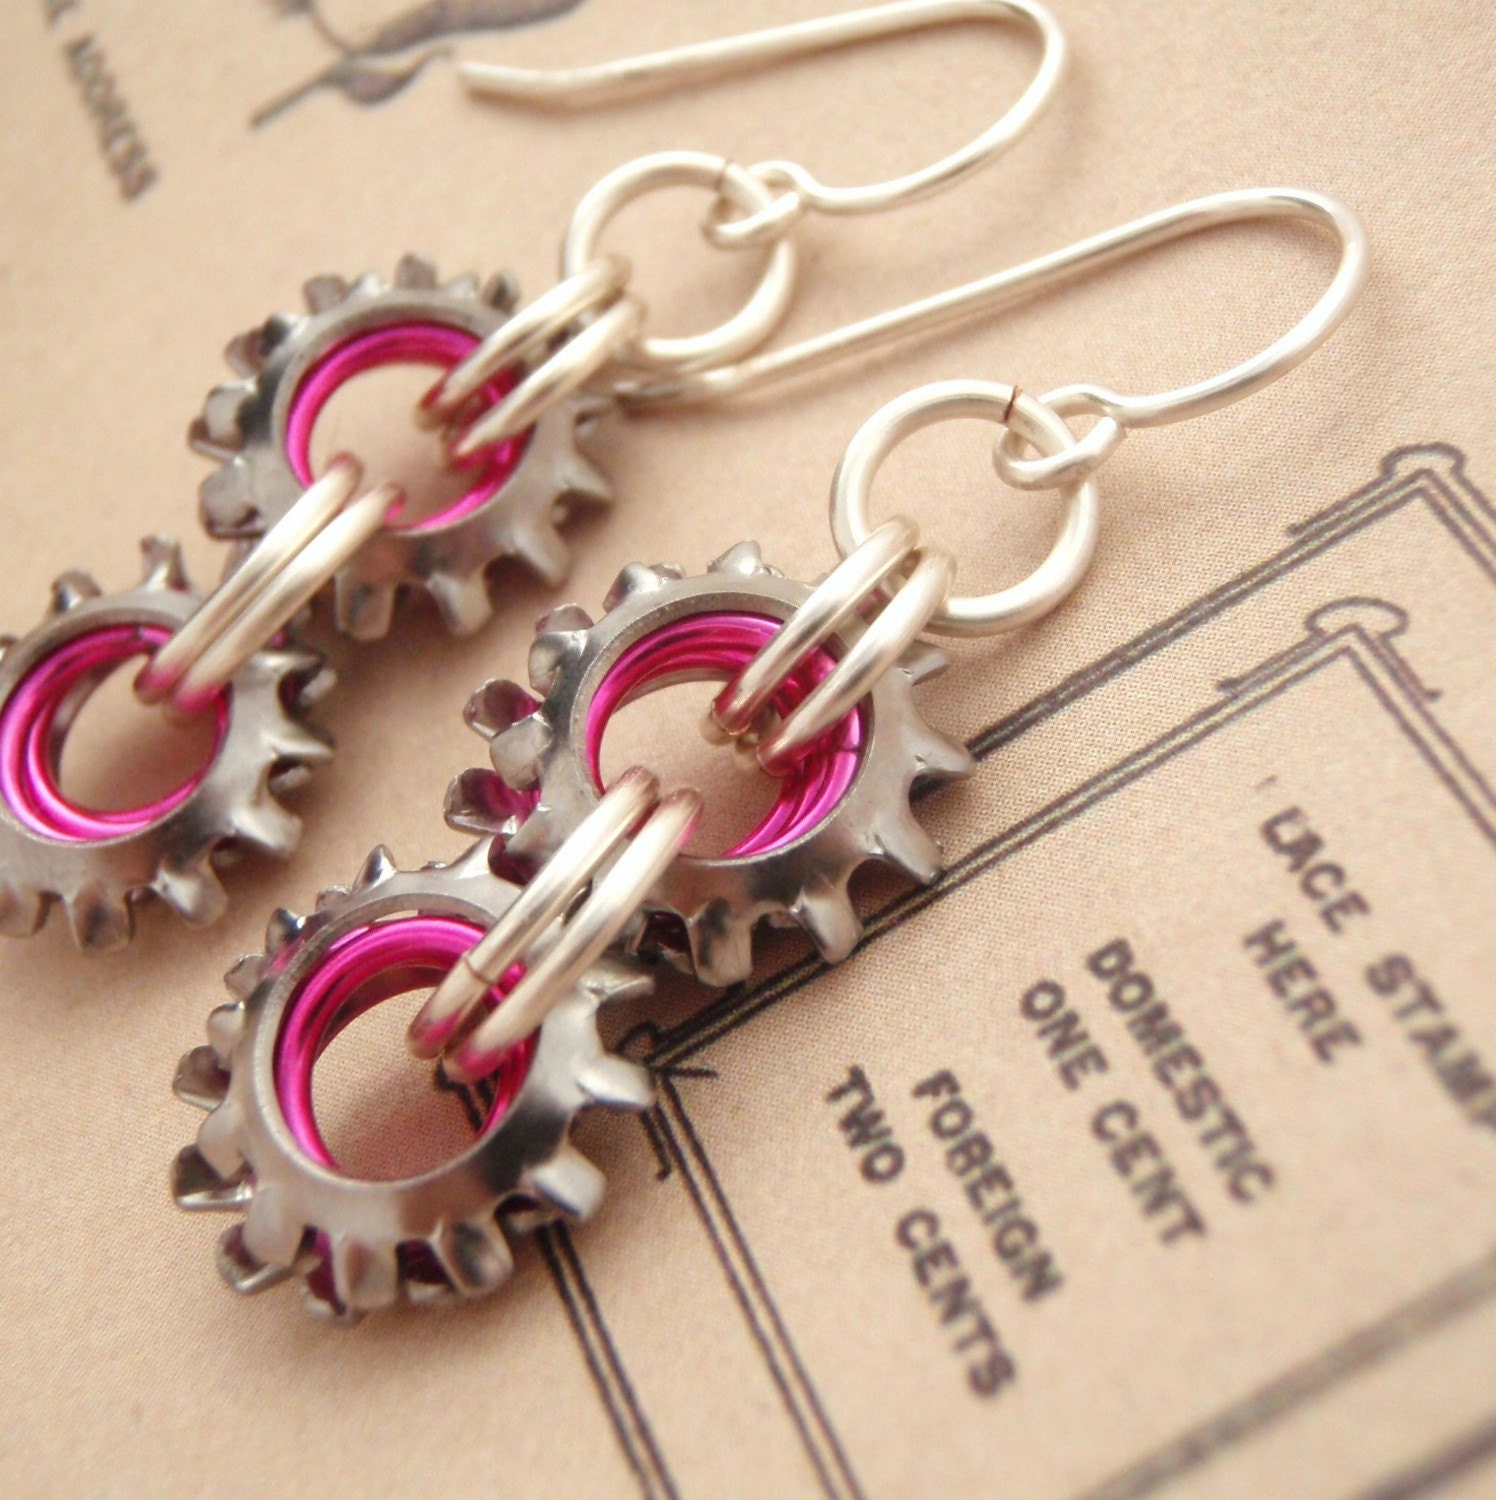 On The Edge Steampunk Chainmaillle Earrings in Silver and NEON Pink and All Non Tarnishing